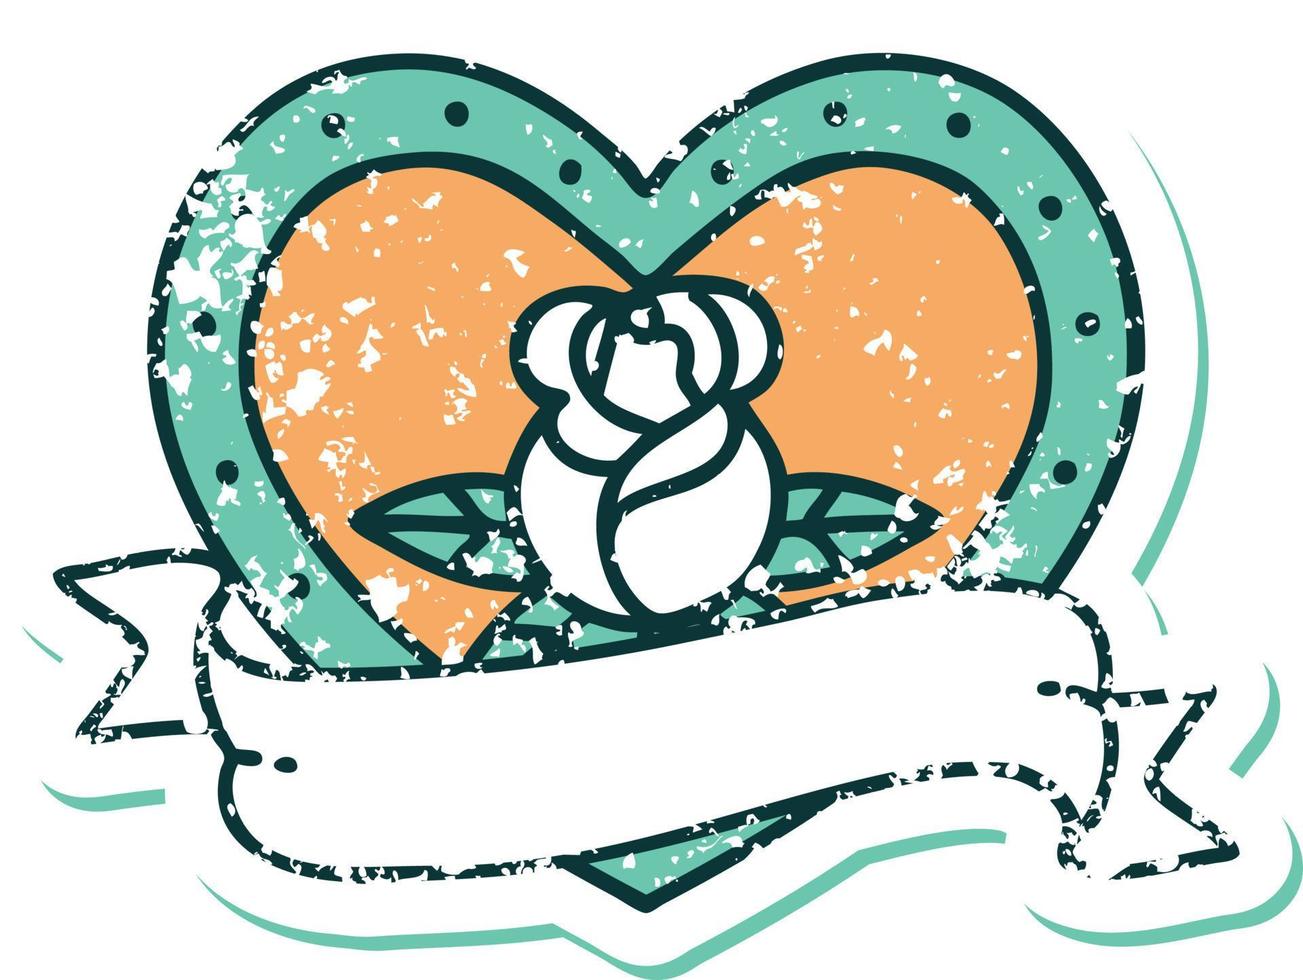 iconic distressed sticker tattoo style image of a heart rose and banner vector